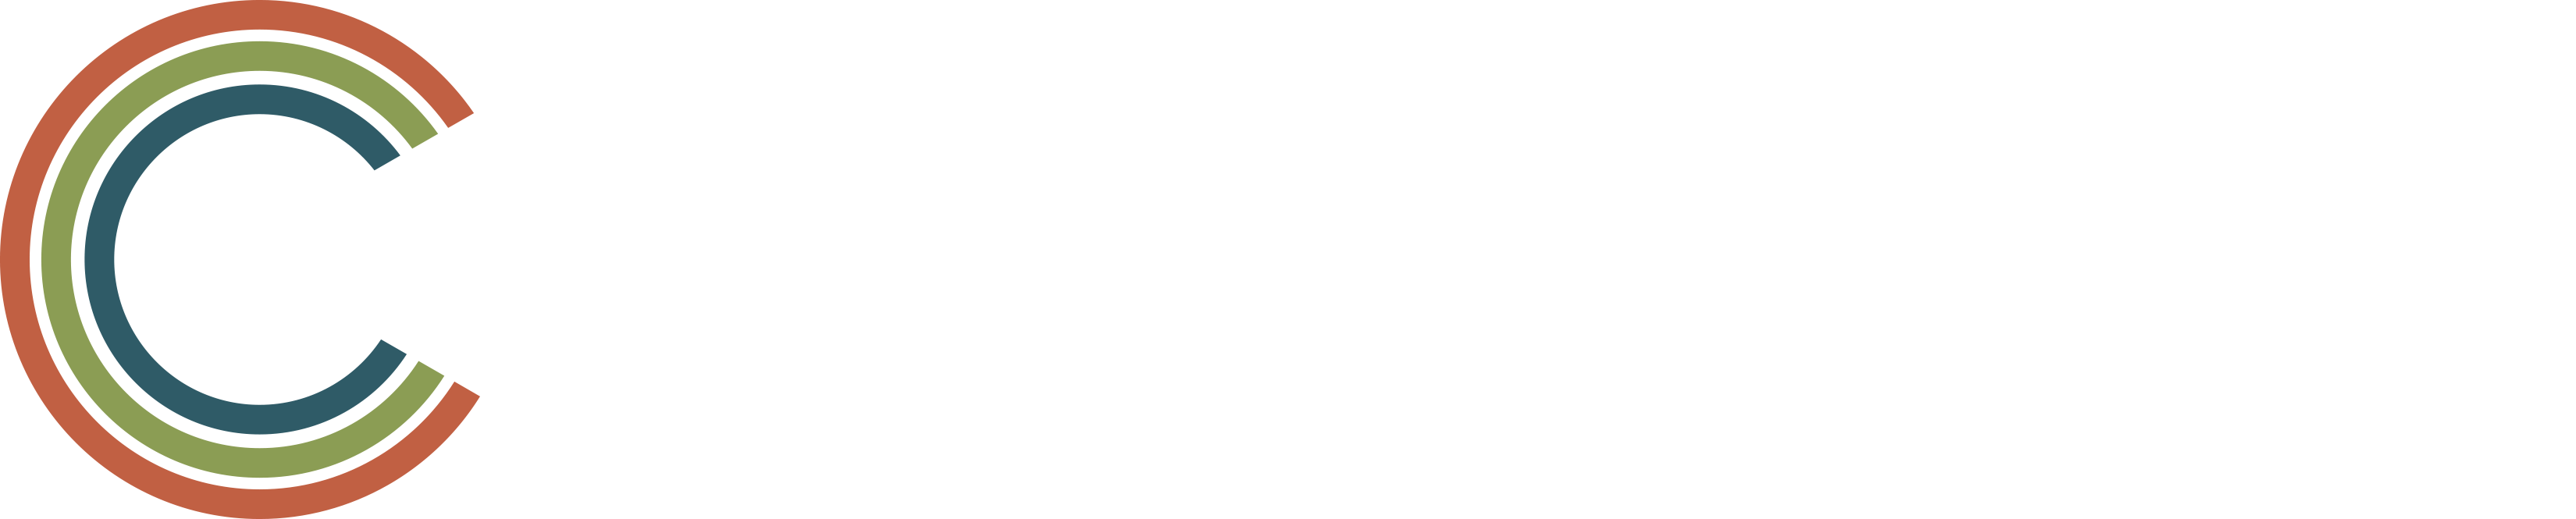 Center for Excellence in Physical Therapy Logo